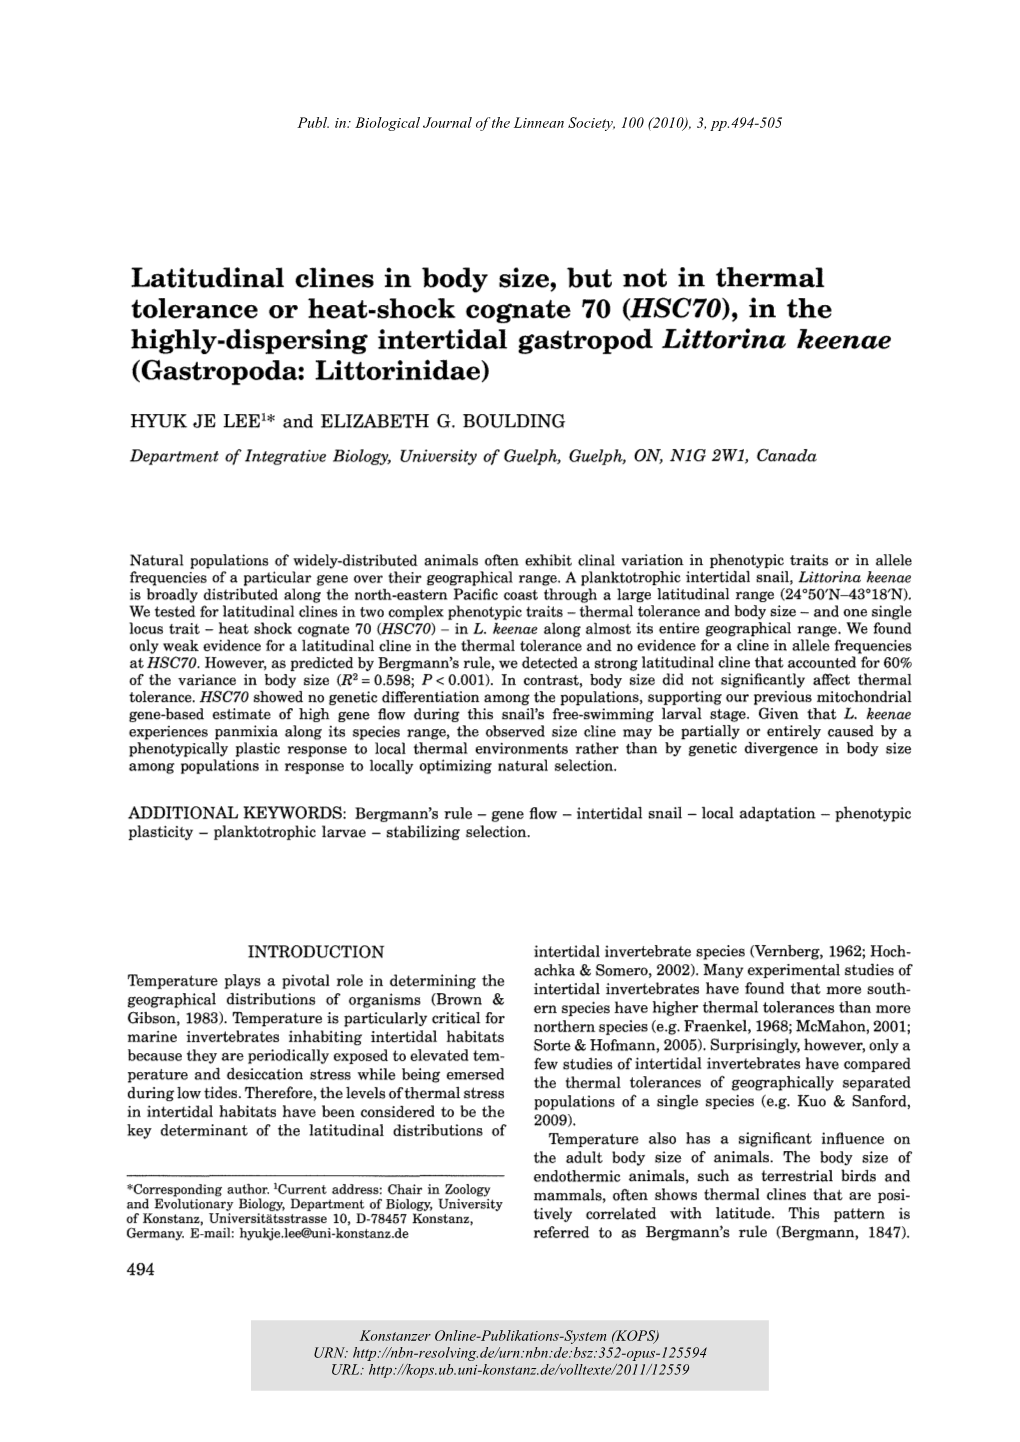 Latitudinal Clines in Body Size, but Not in Thermal Tolerance Or Heat-Shock Cognate 70 (HSC70), in the Highly-Dispersing Interti